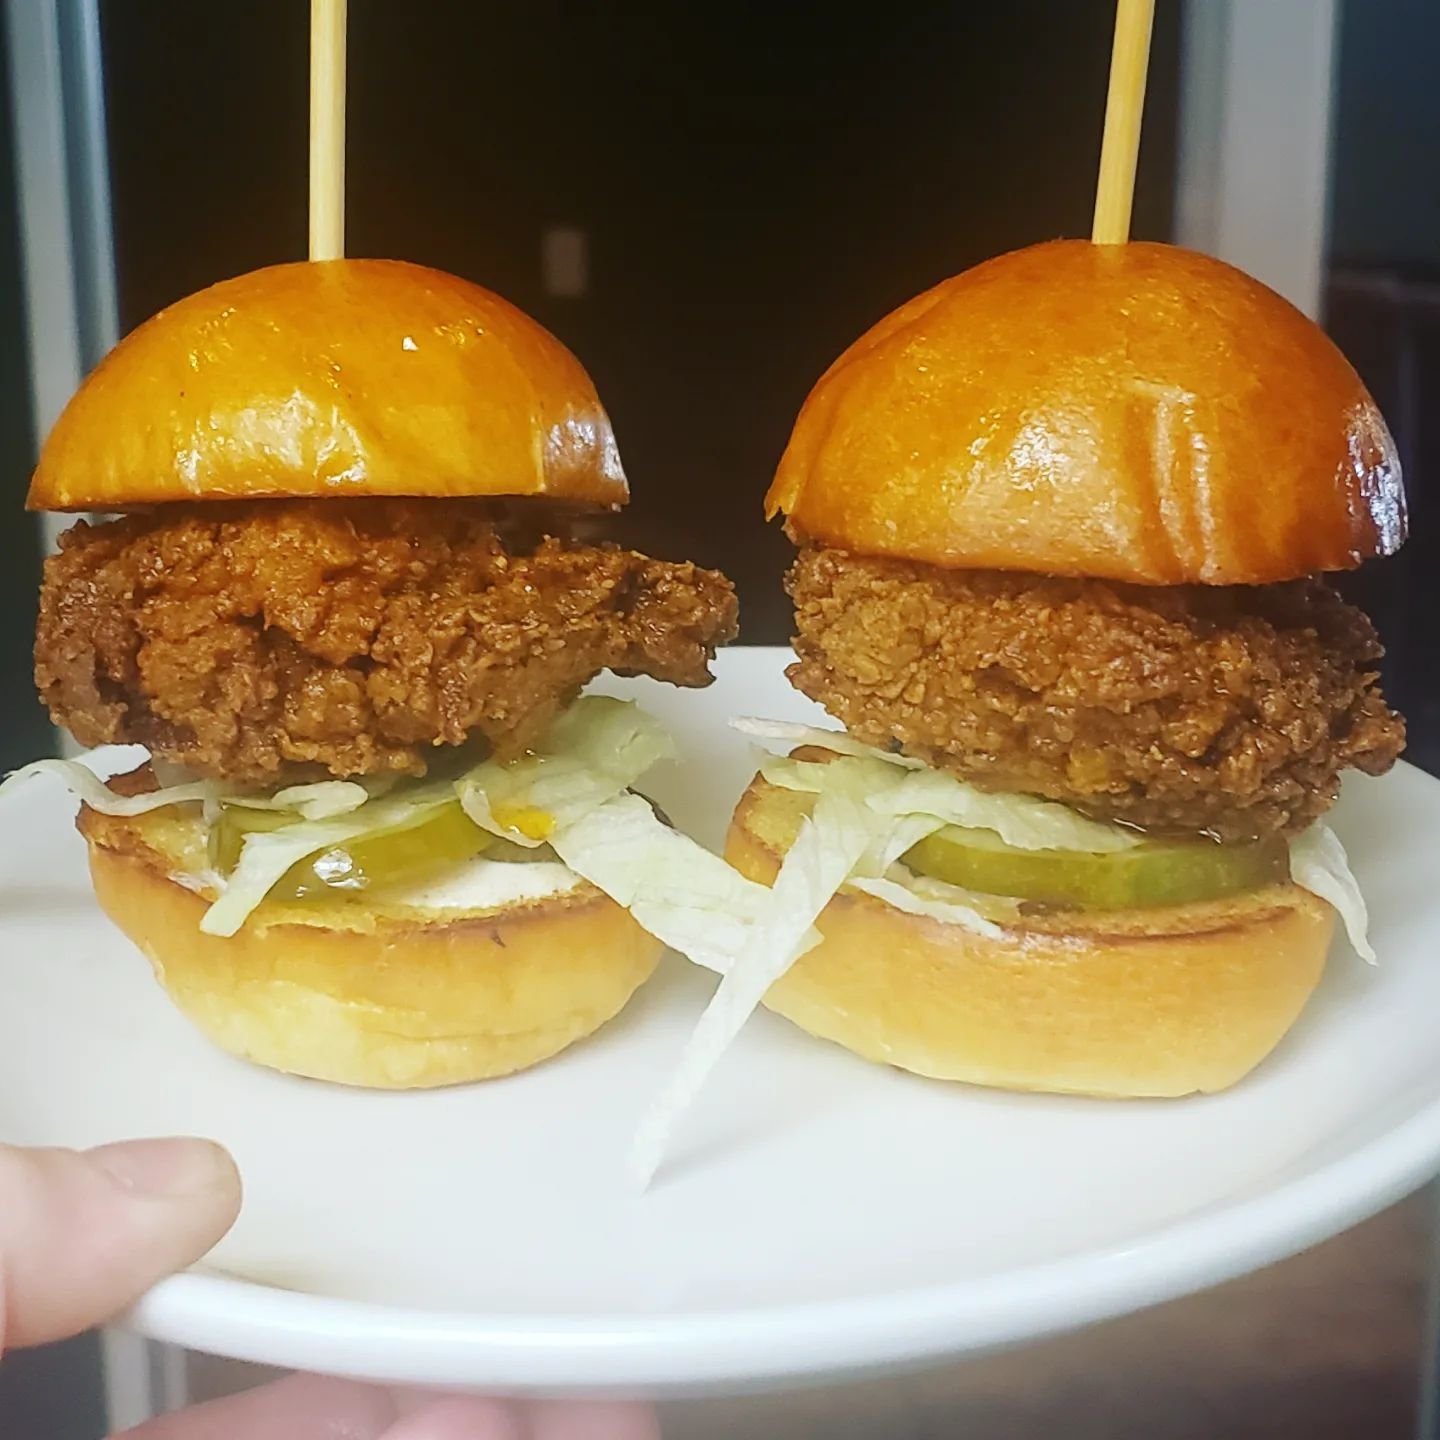 Szechuan Hot Chicken Sliders are looking really good today! 

Perfect for sharing (or not!)

#eatlocal #thelocal63